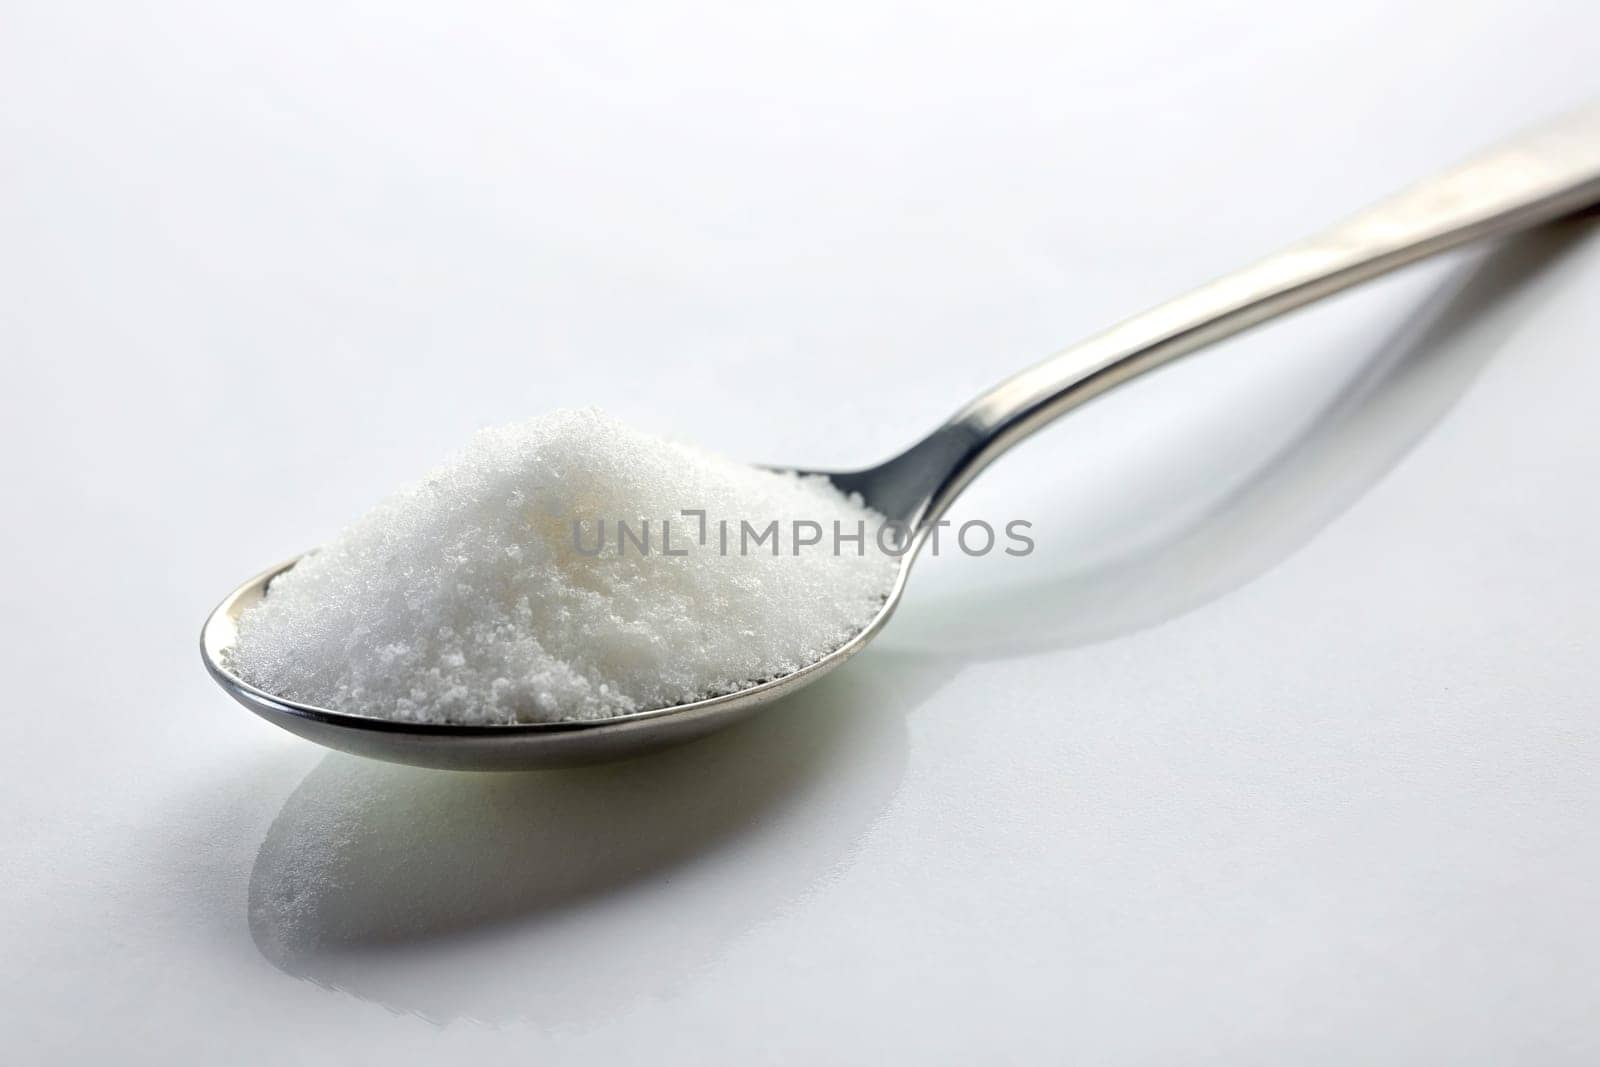 Sugar in a spoon on background, close-up. isolated. Food concept.